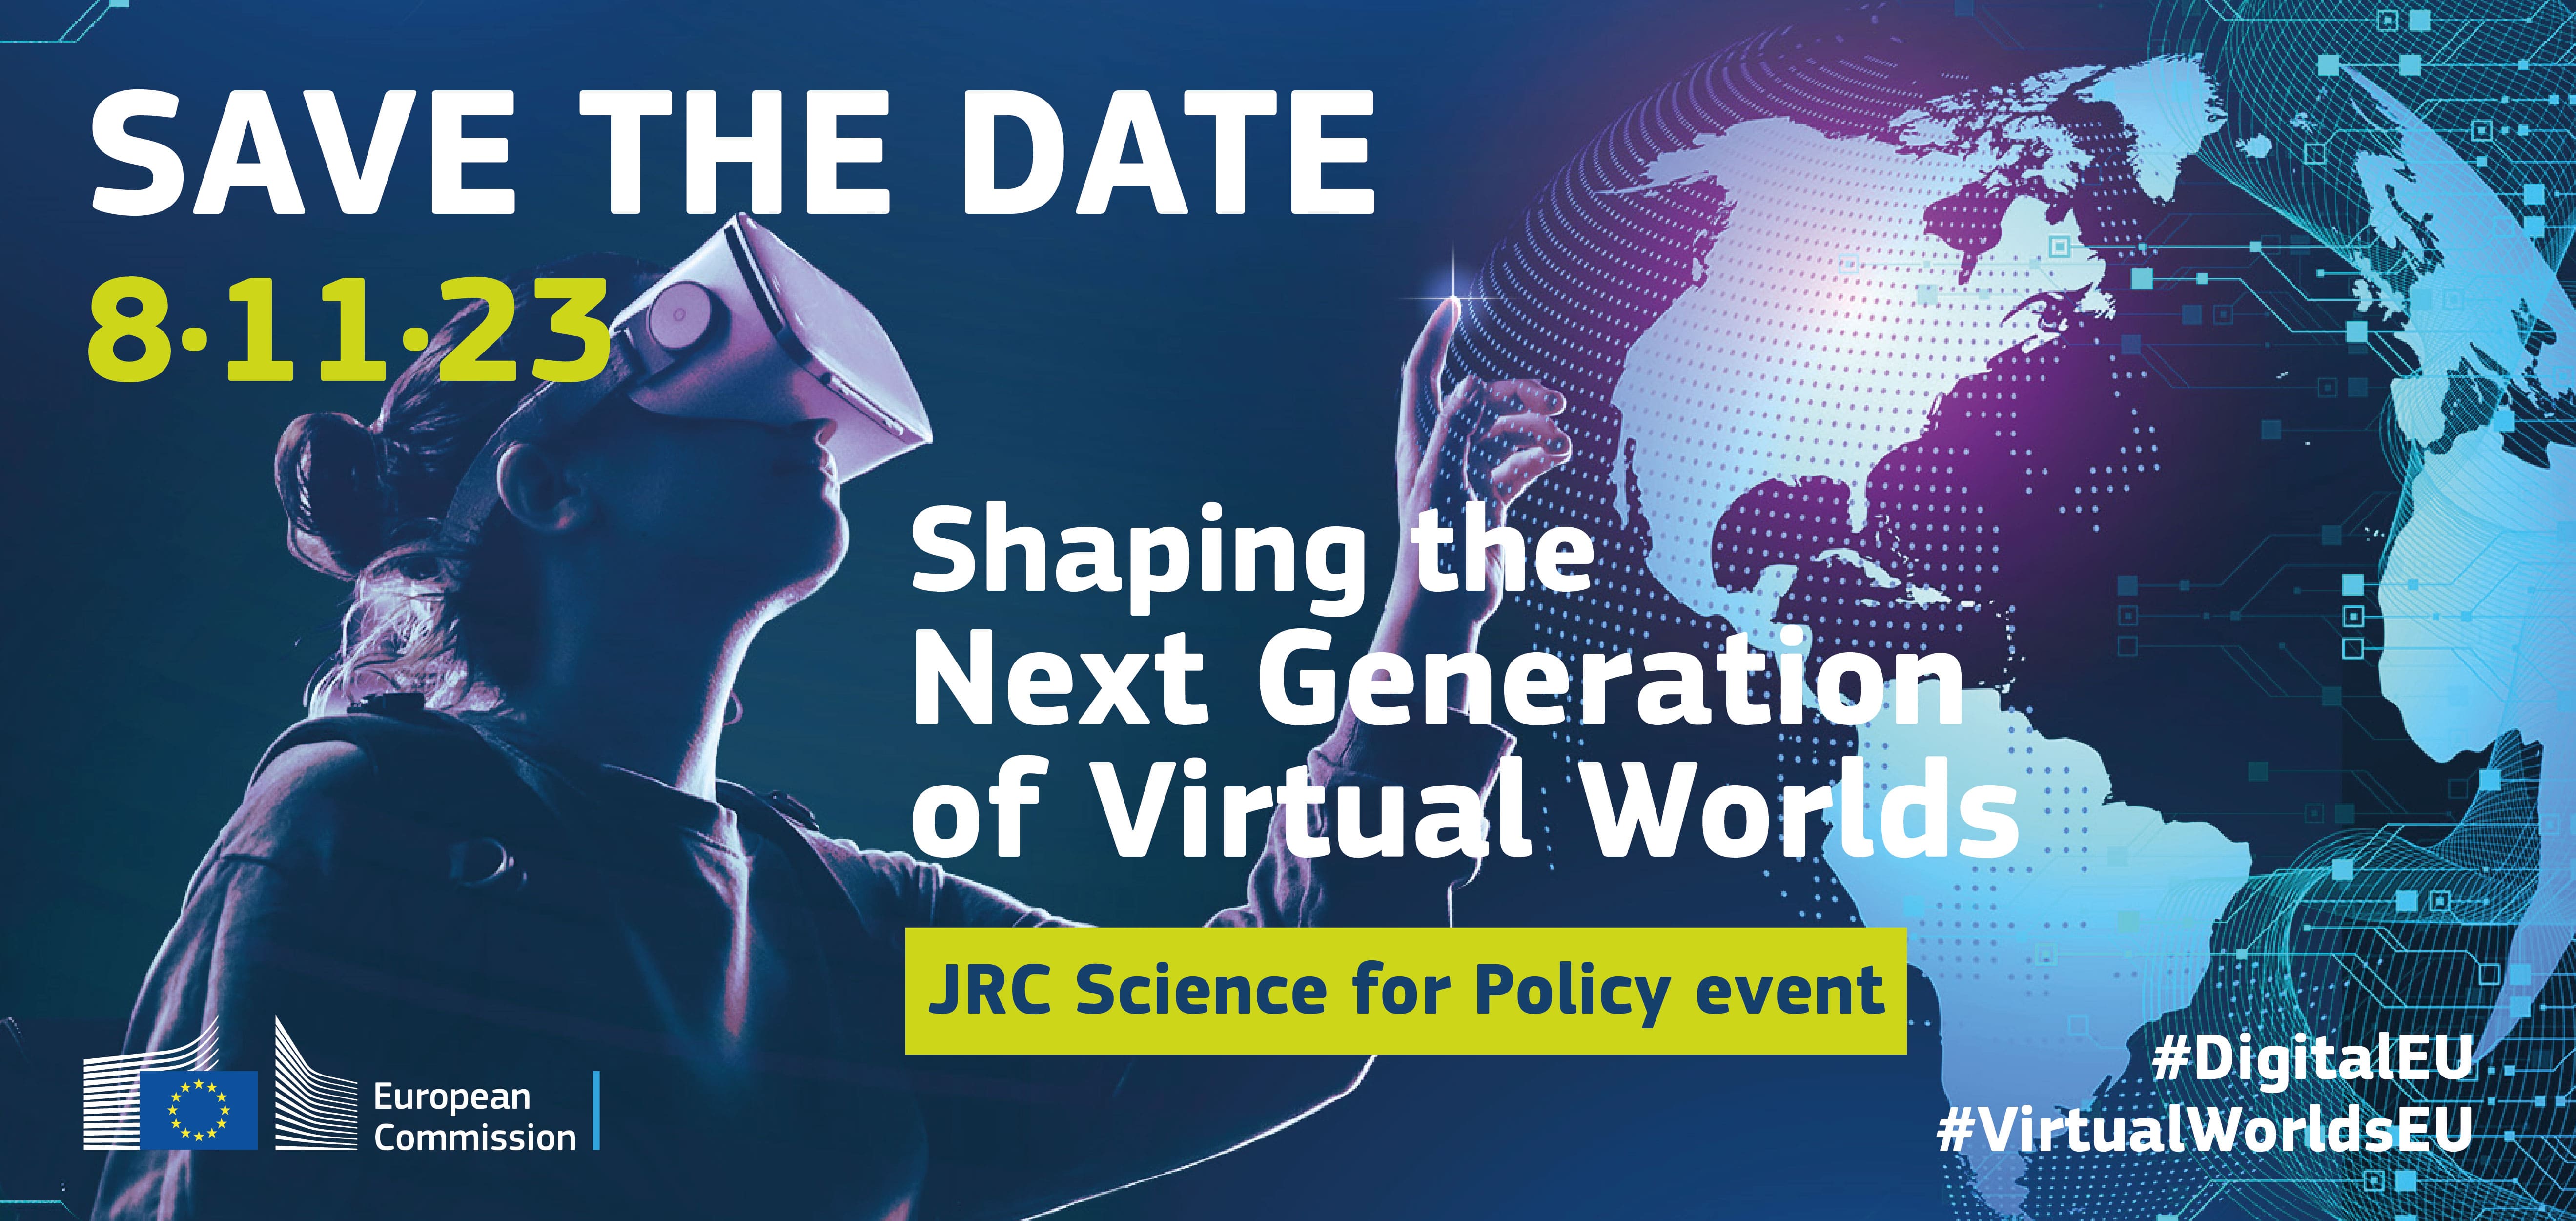 Save the date: Virtual worlds event